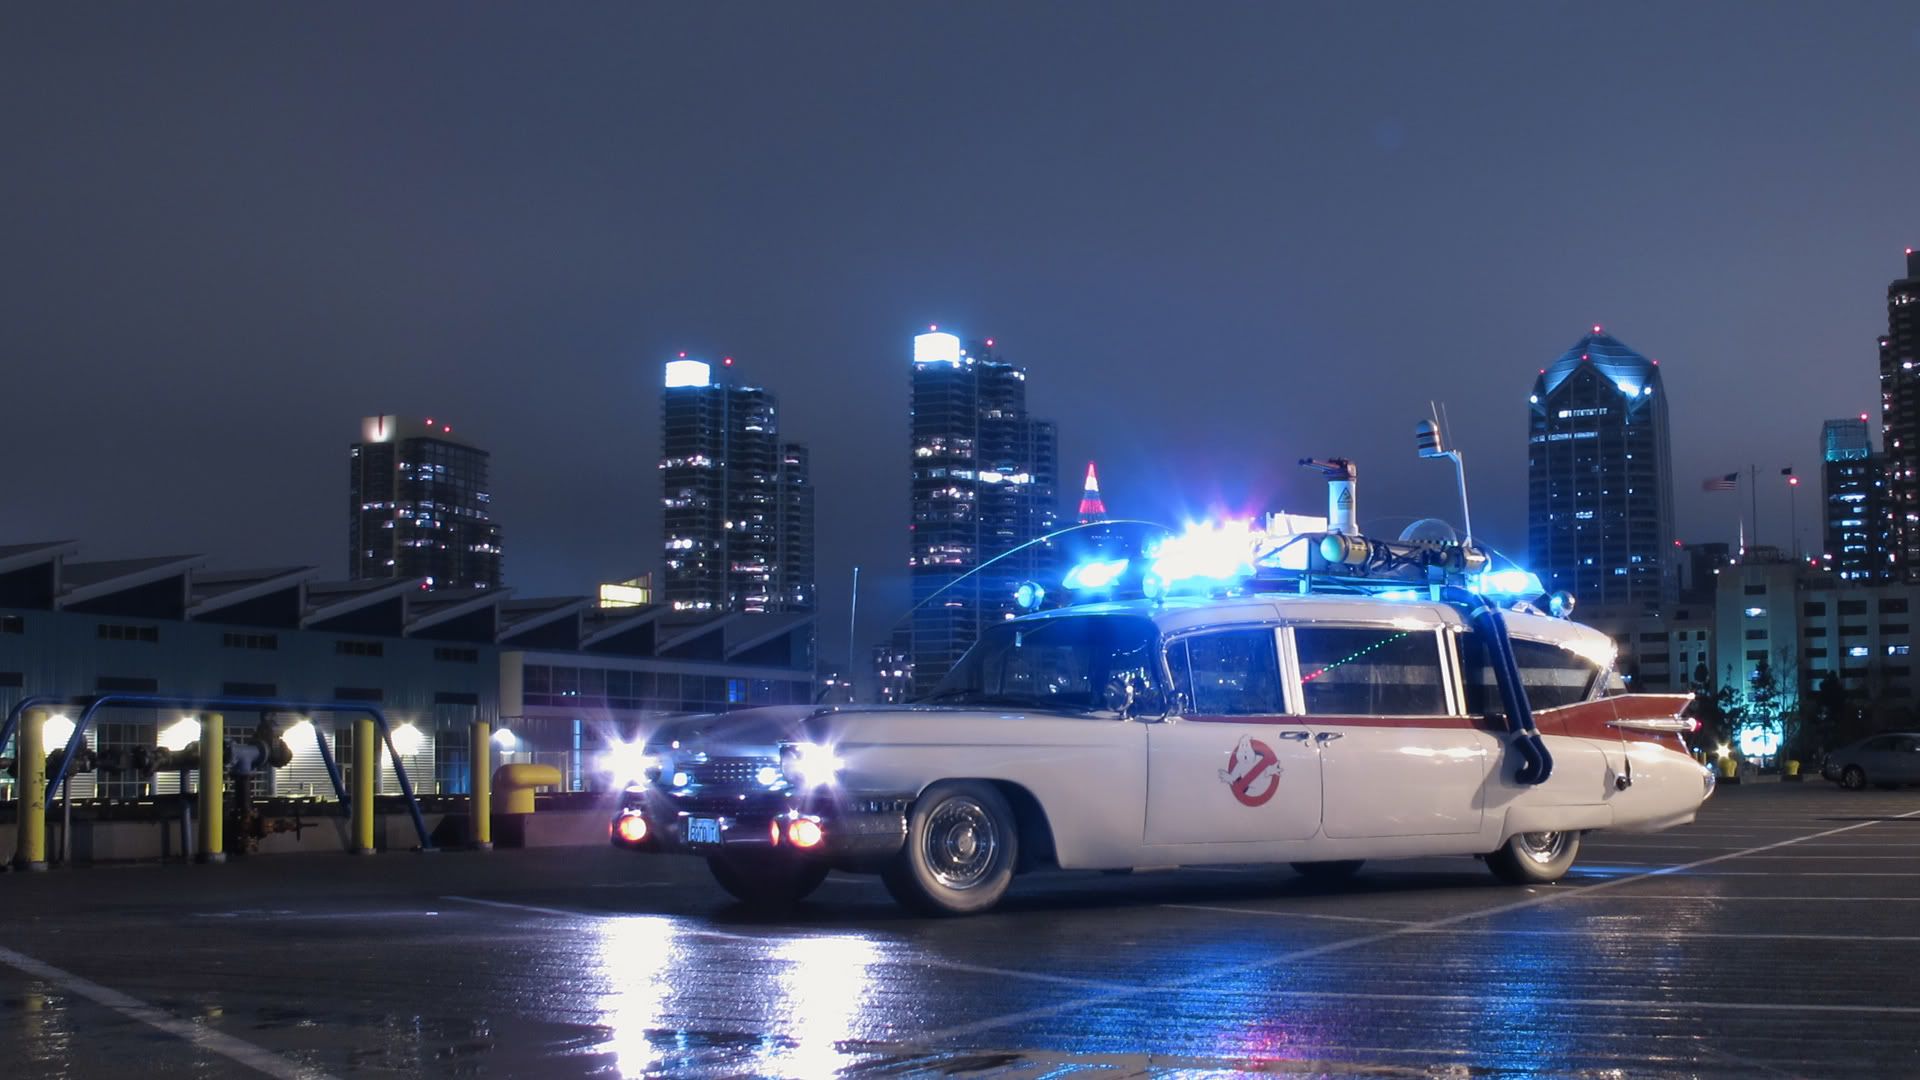 Free download Ghostbusters wallpaper 381016 [1920x1080]